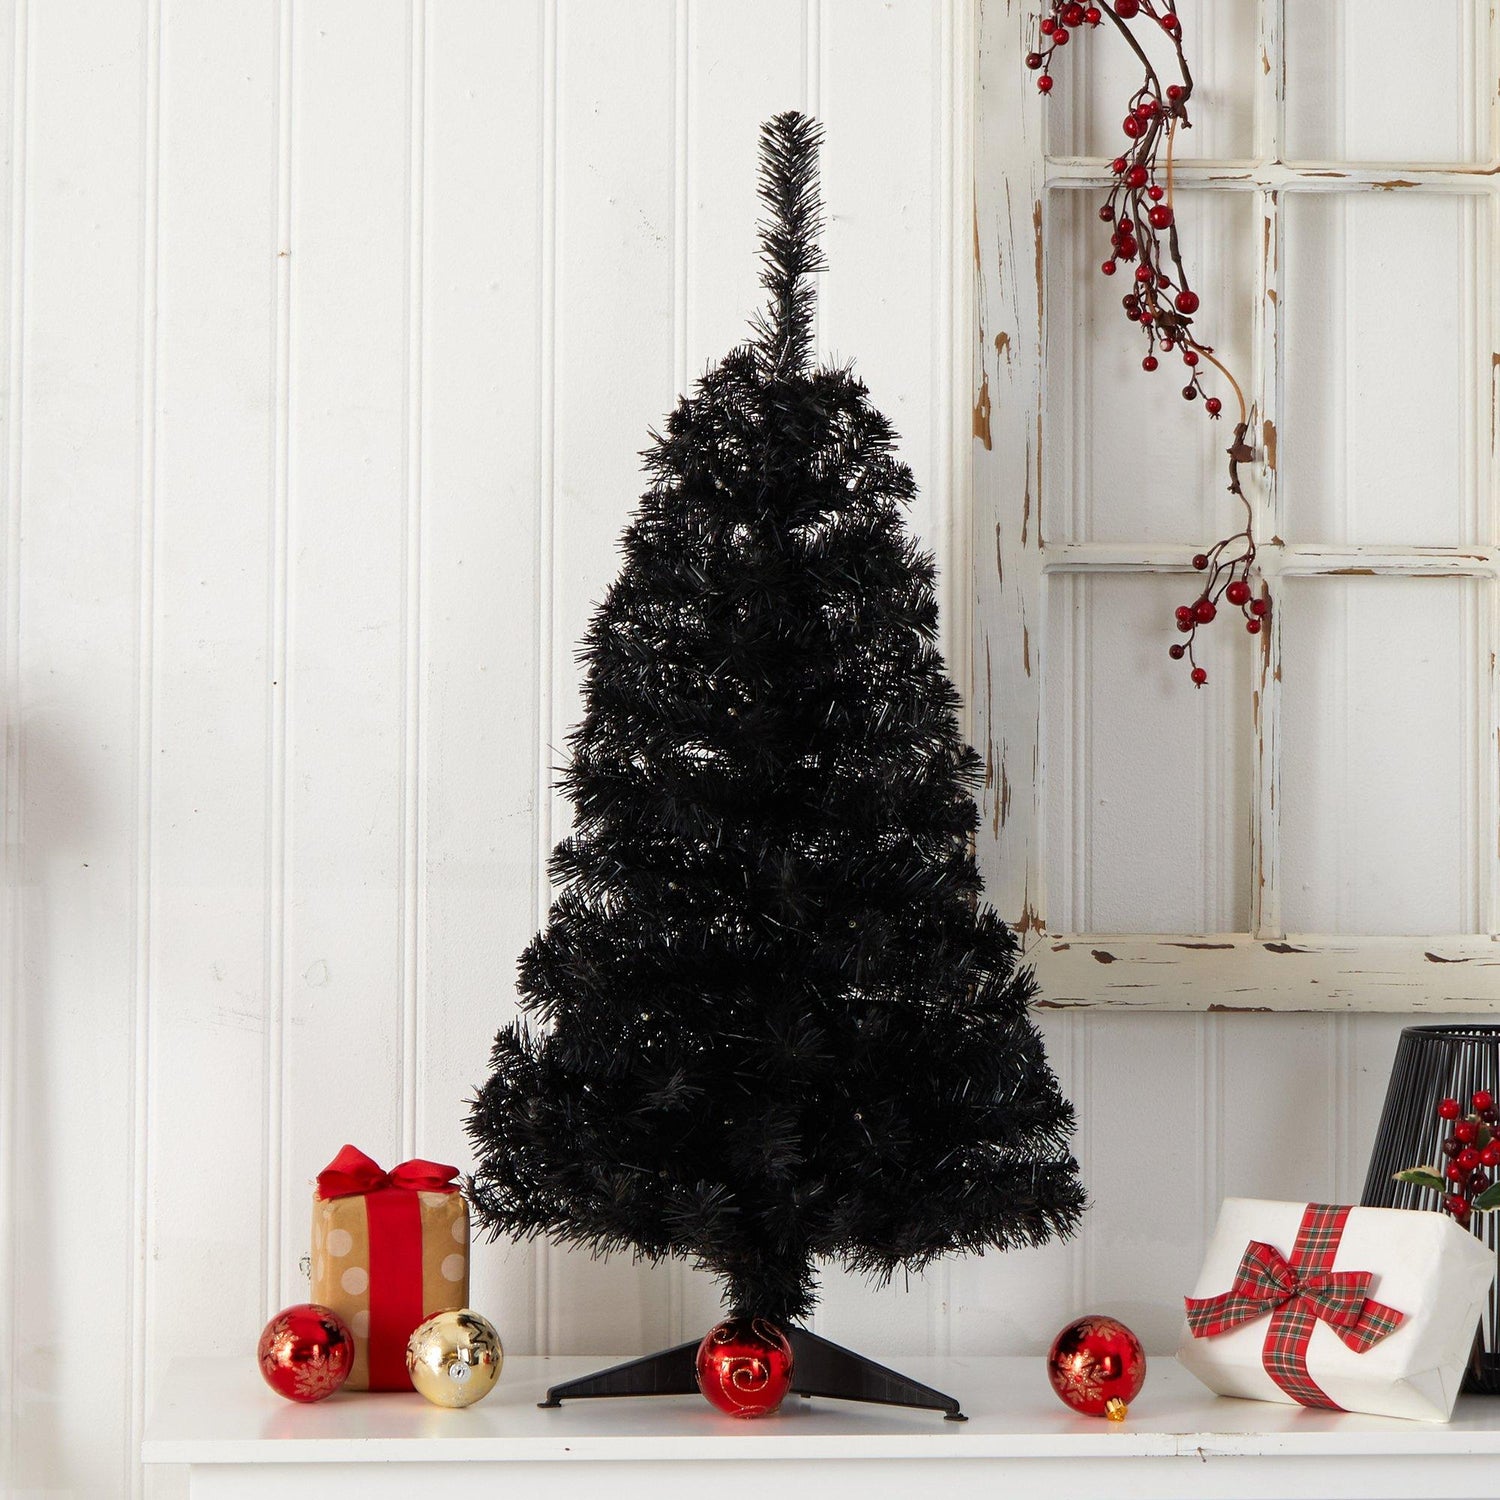 3’ Black Artificial Christmas Tree with 50 LED Lights and 118 Bendable Branches